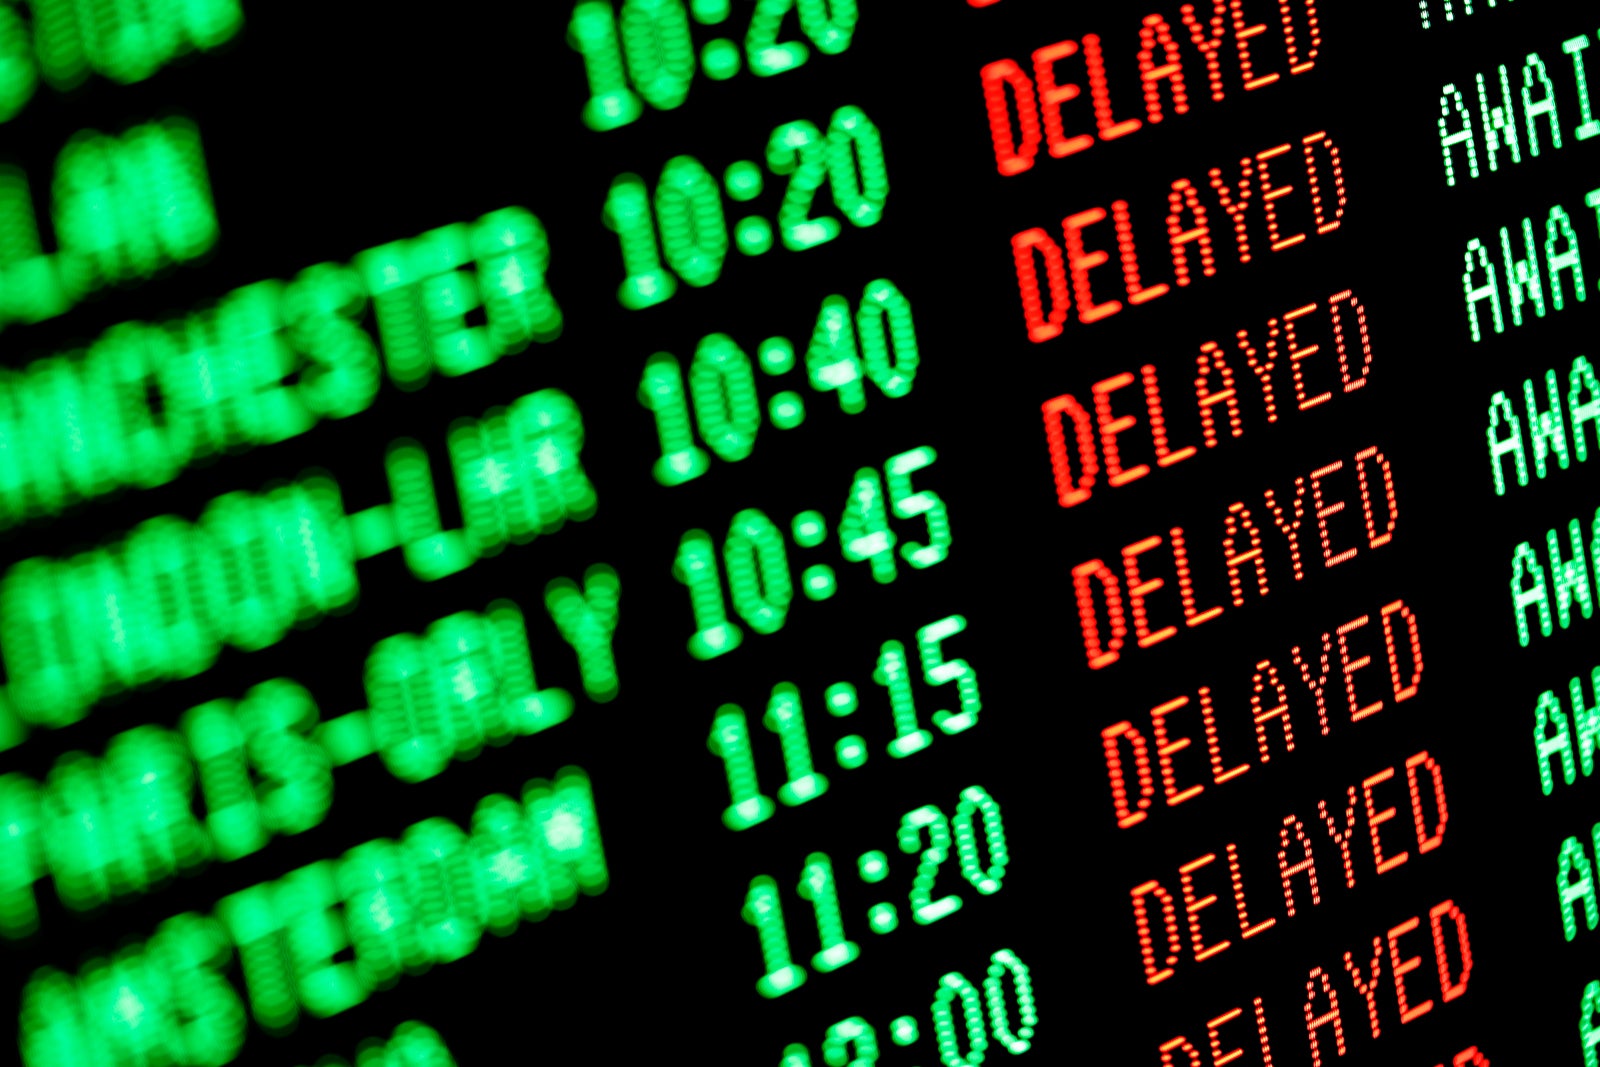 Flight delayed? Remember these 4 things if you want trip delay reimbursement from your credit card